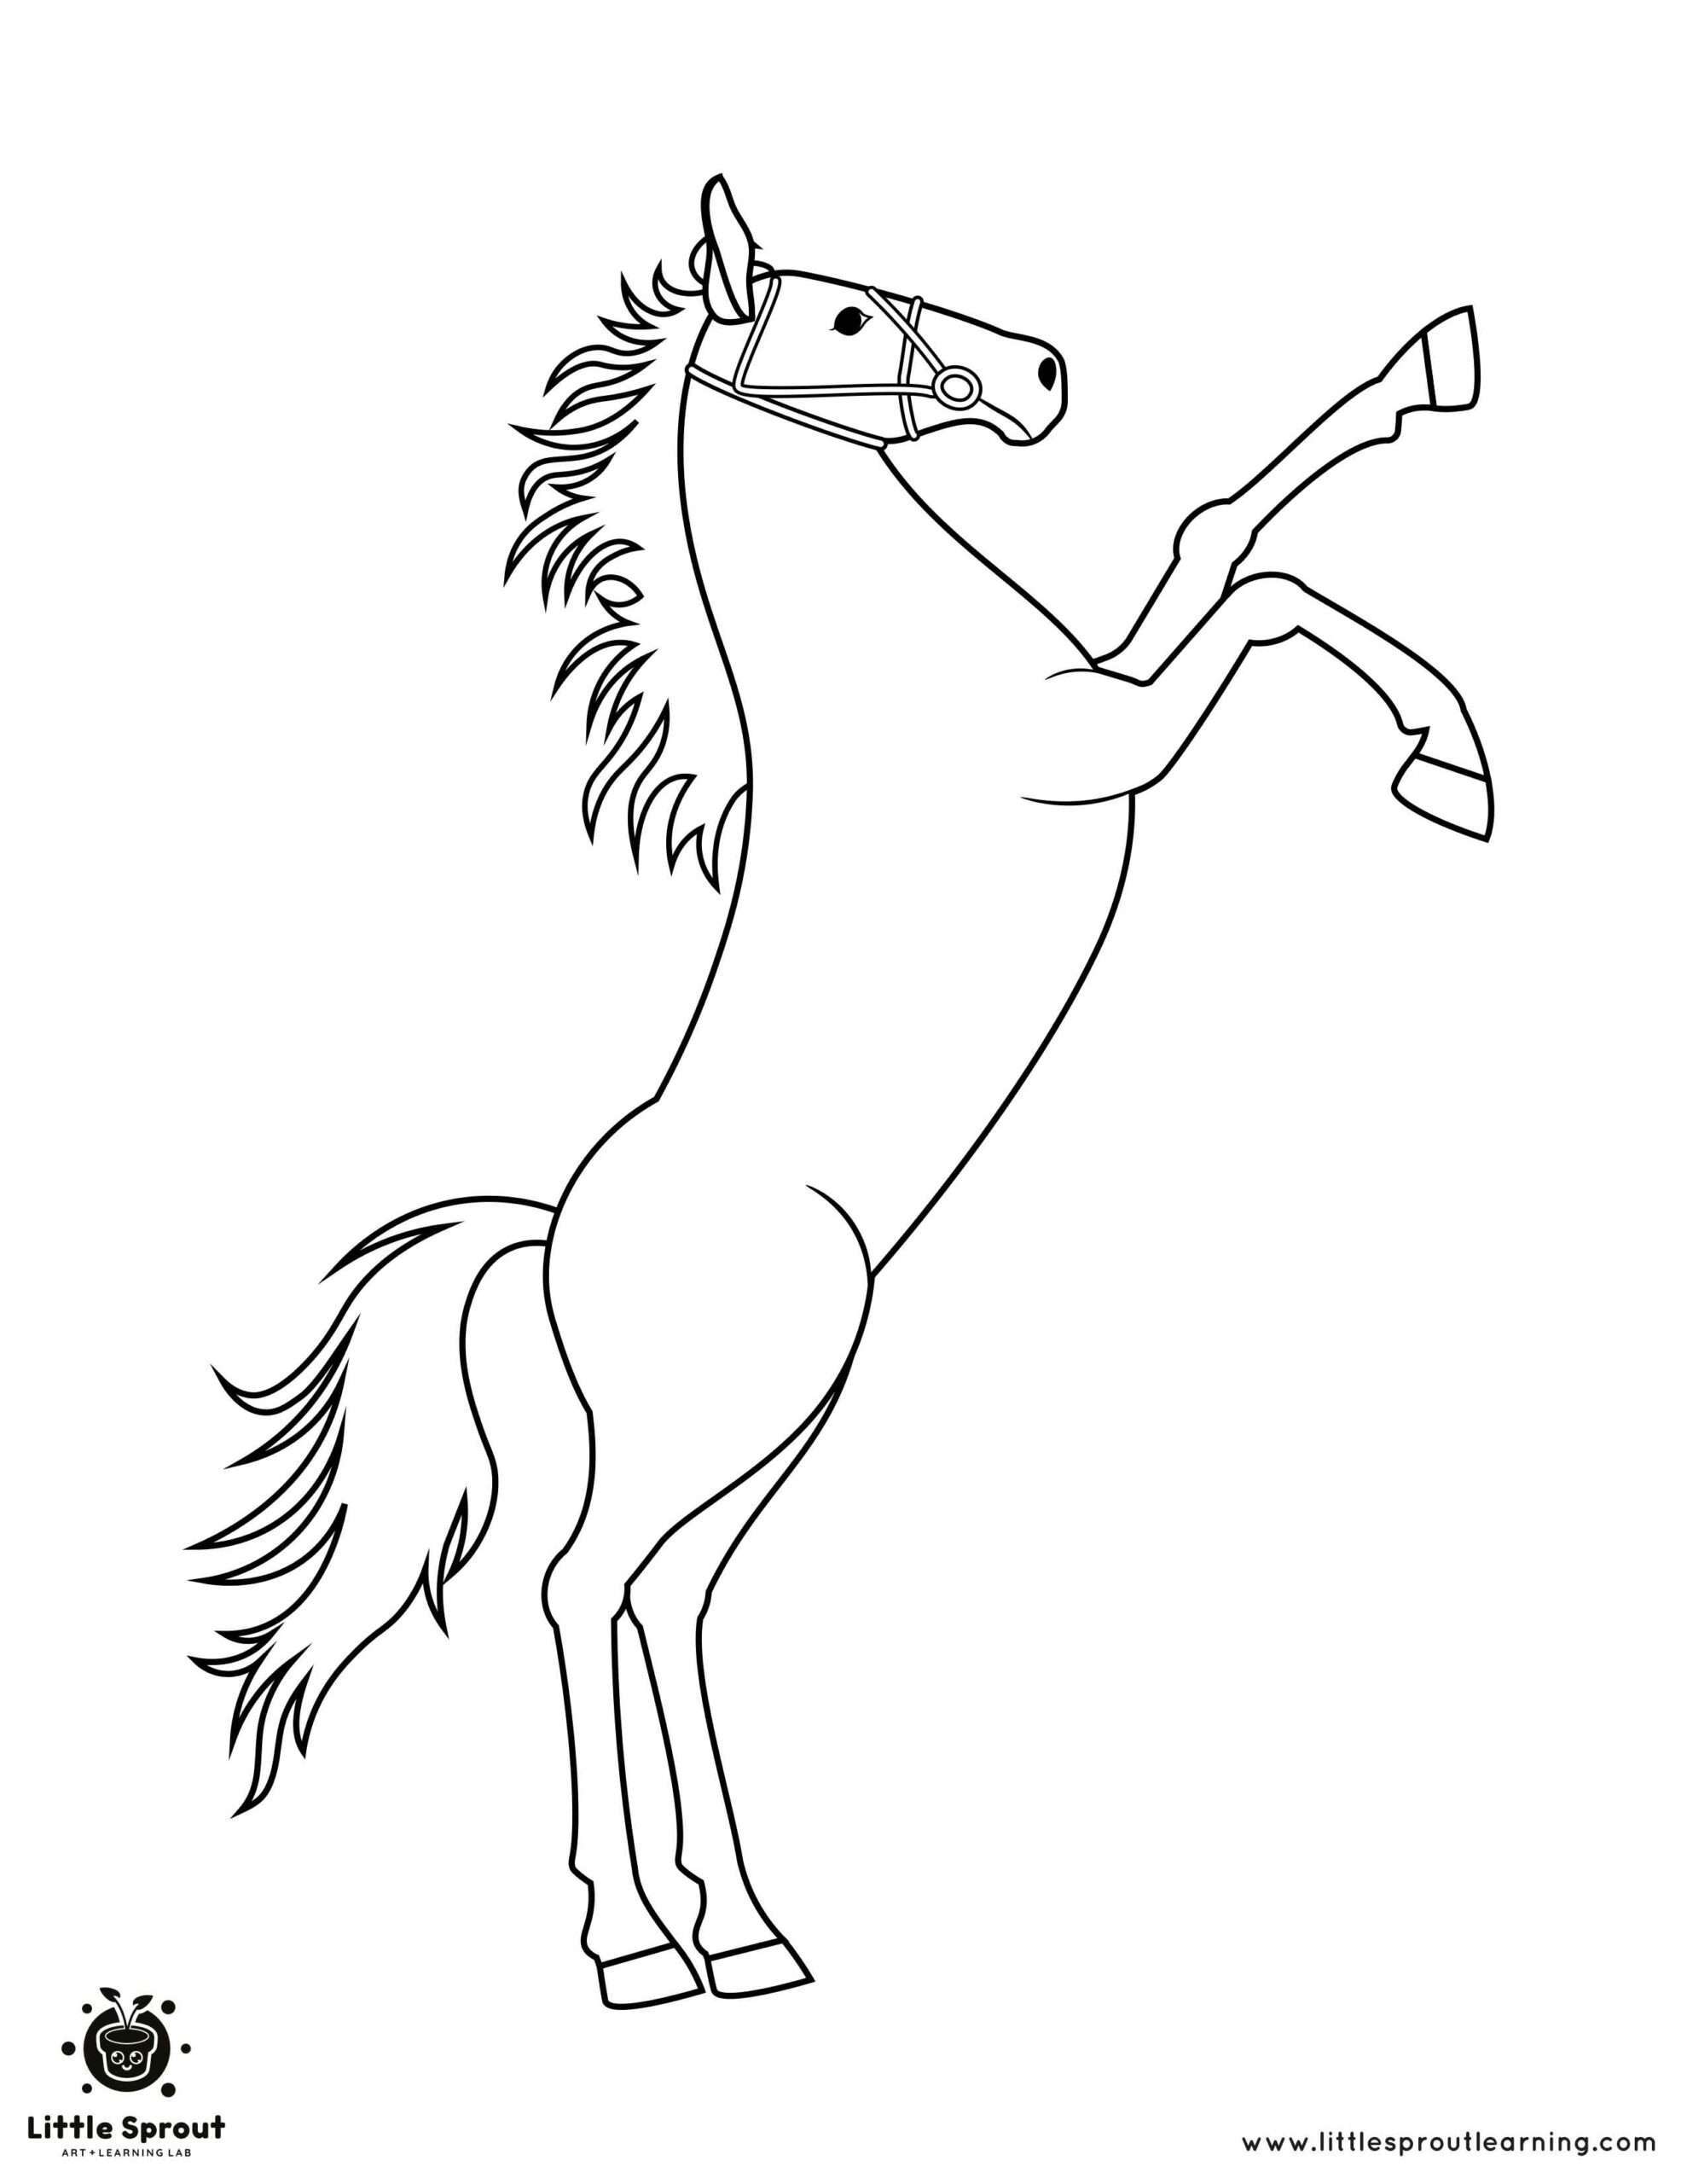 Standing horse Coloring Page